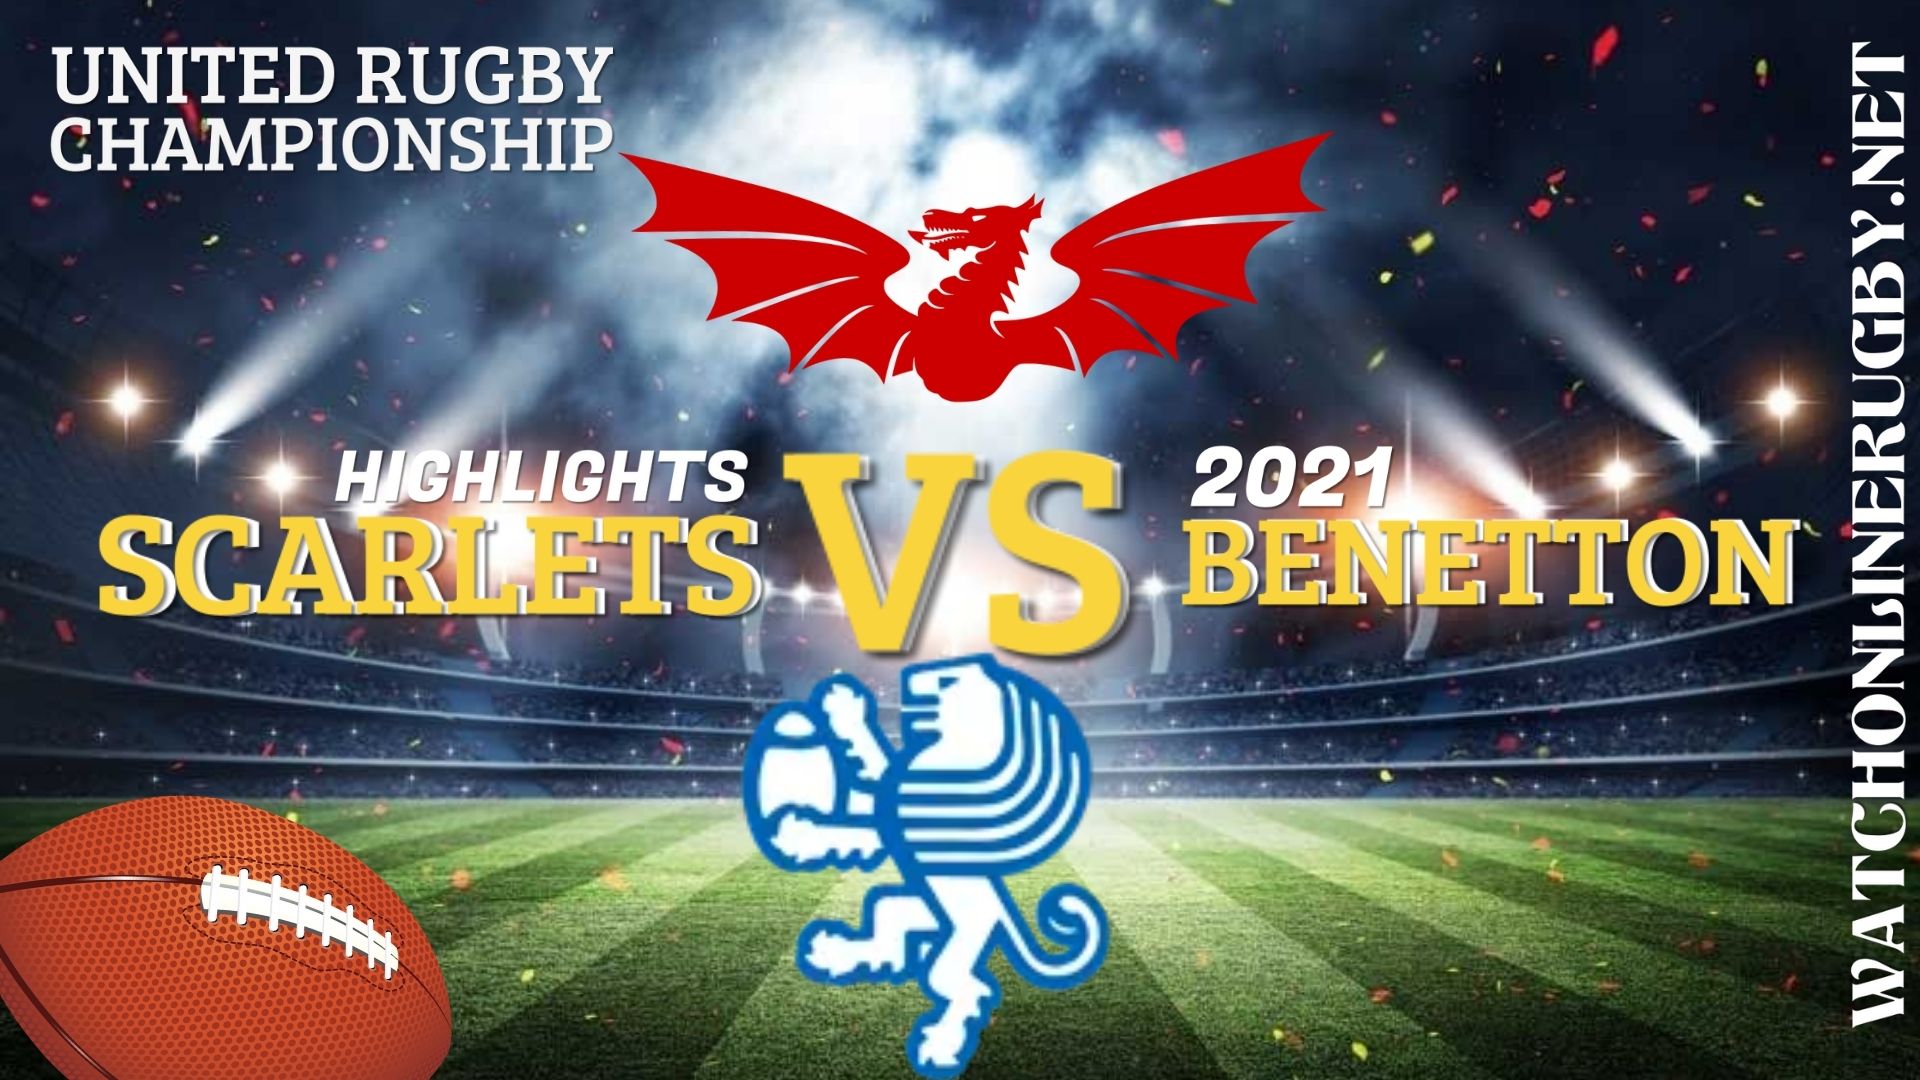 Scarlets Vs Benetton United Rugby Championship 2021 RD 6